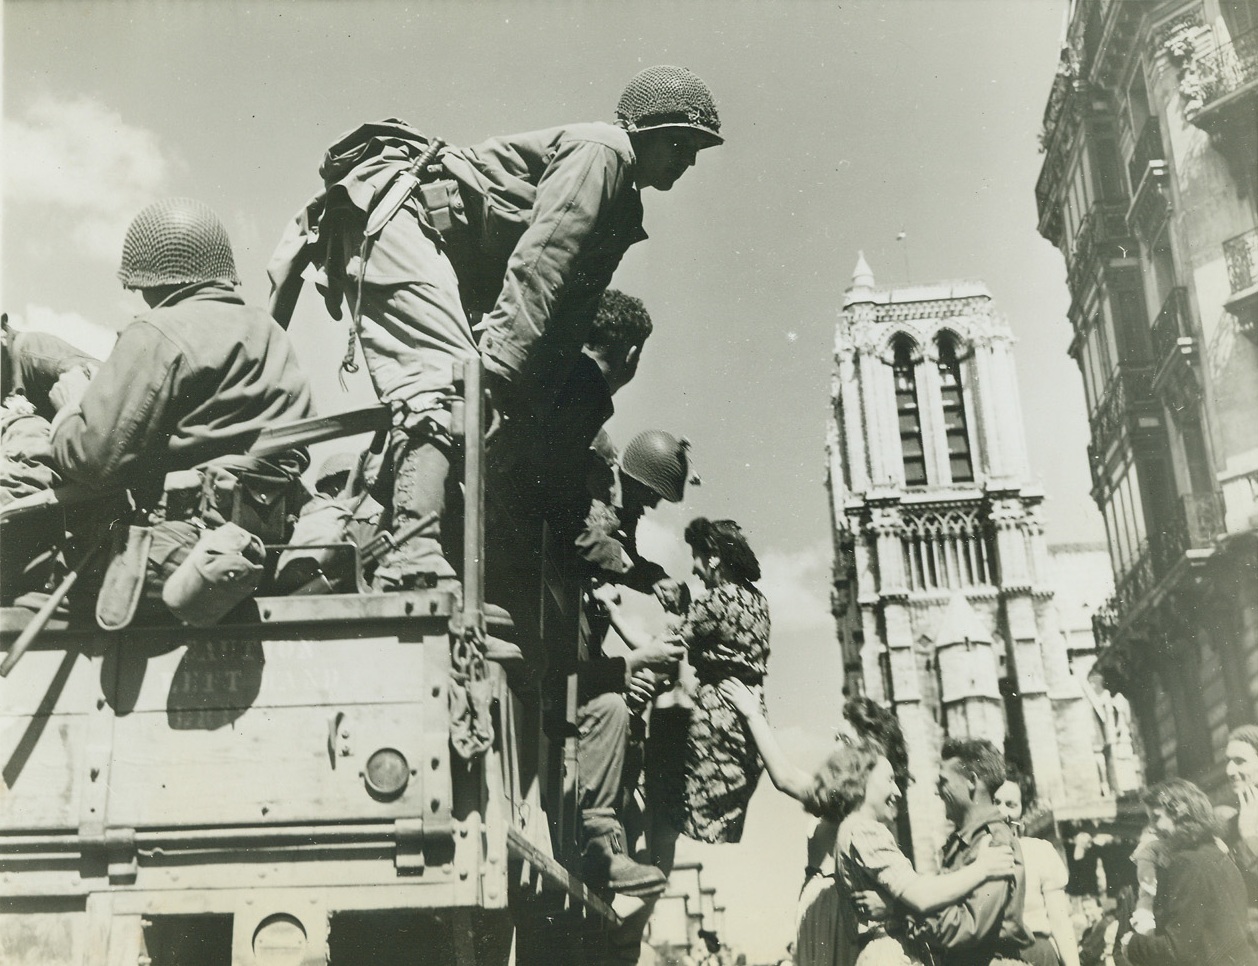 Welcome to the Liberating Americans, 8/28/1944. Paris – United States soldiers are shown being joyfully greeted by French women in the shadow of Notre Dame Cathedral. They dance – and one girl may be pulling a soldier from the truck. Credit: ACME photo by Bert Brandt for the War Picture Pool;